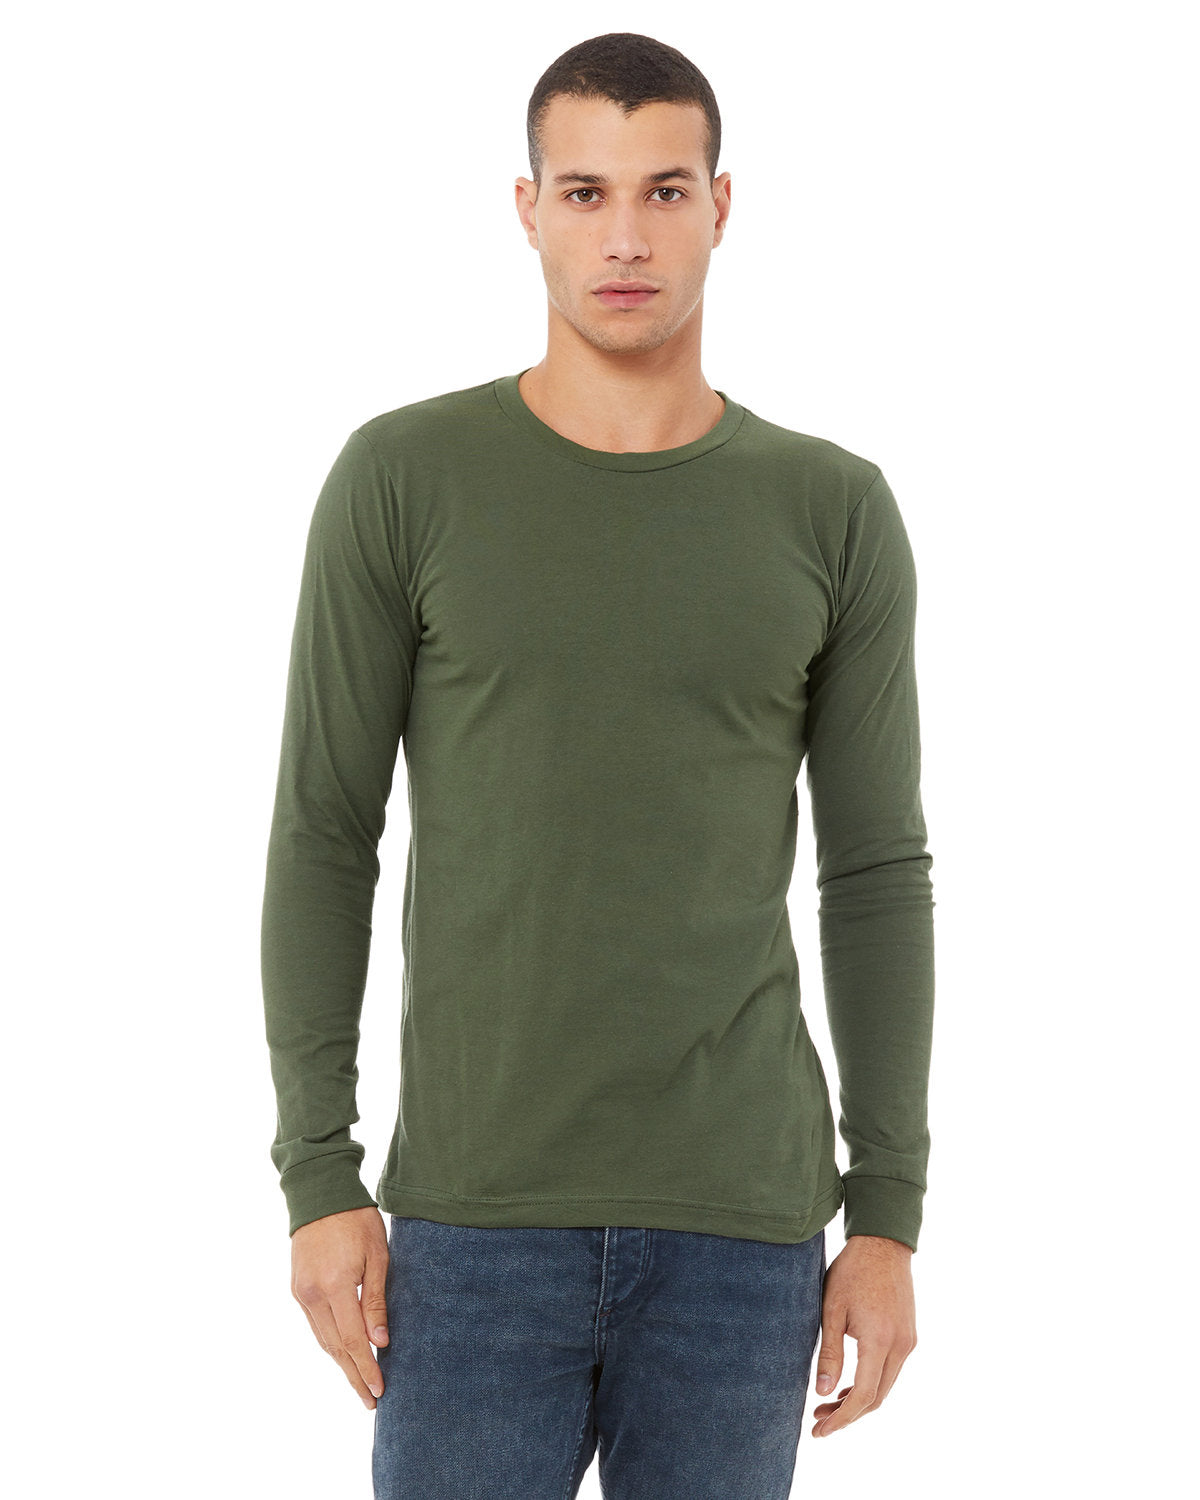 Military Green, front view.